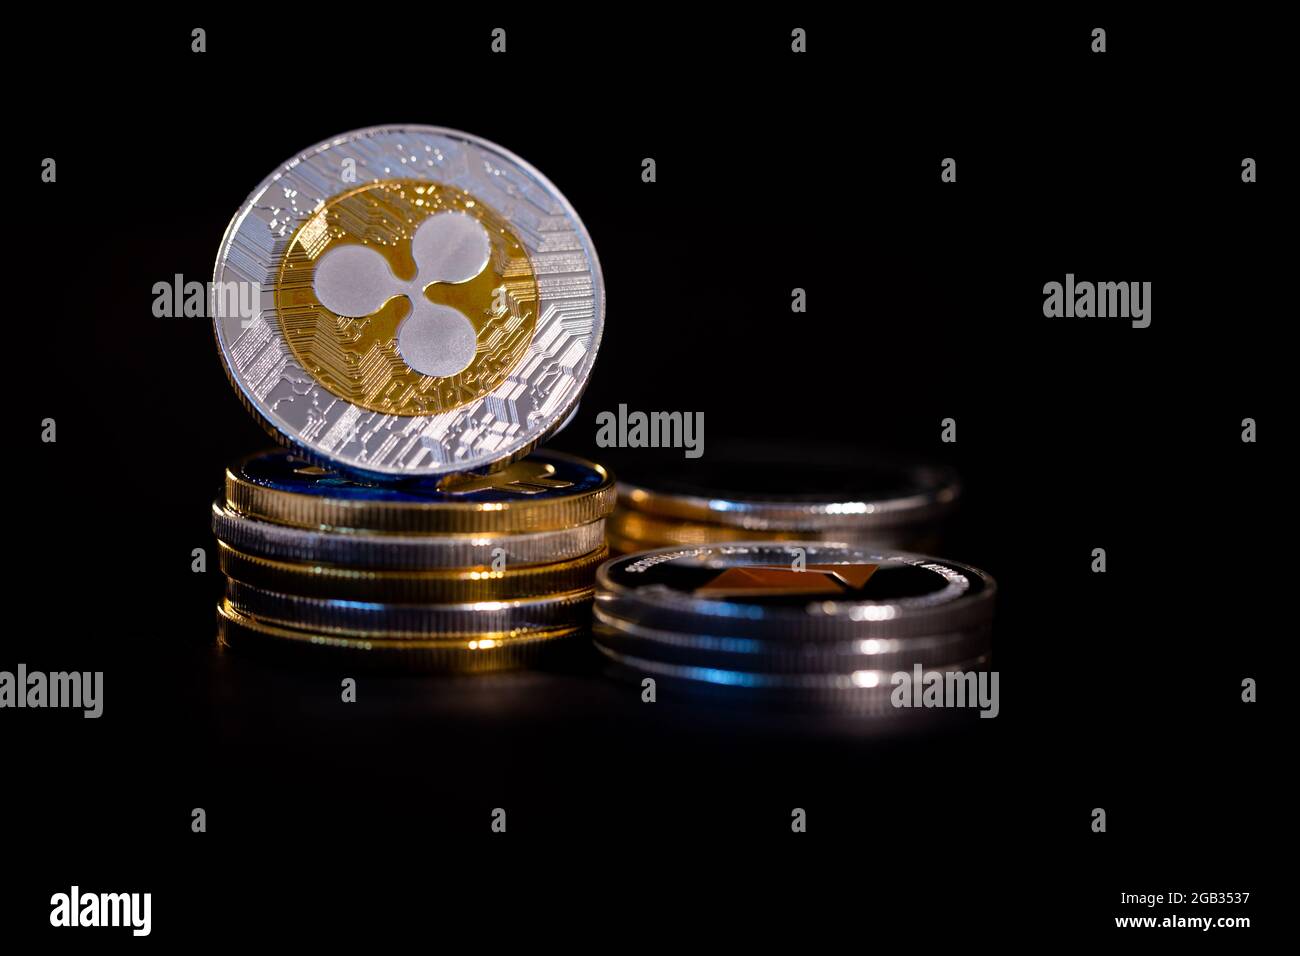 Ripple cryptocurrency coin Stock Photo